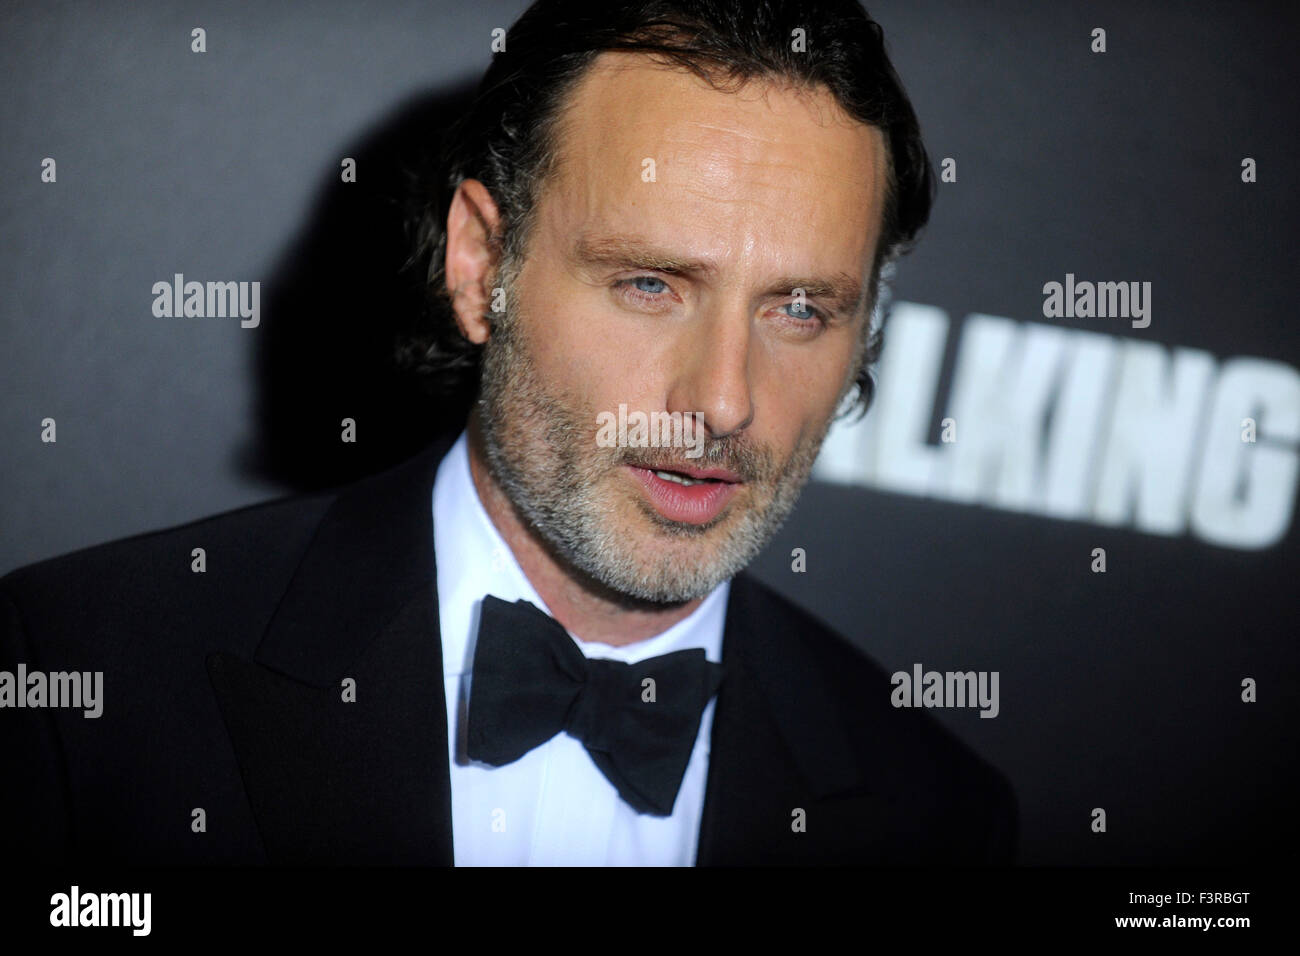 New York City. 9th Oct, 2015. Andrew Lincoln attends AMC's 'The Walking Dead' Season 6 Fan Premiere Event 2015 at Madison Square Garden on October 9, 2015 in New York City./picture alliance © dpa/Alamy Live News Stock Photo